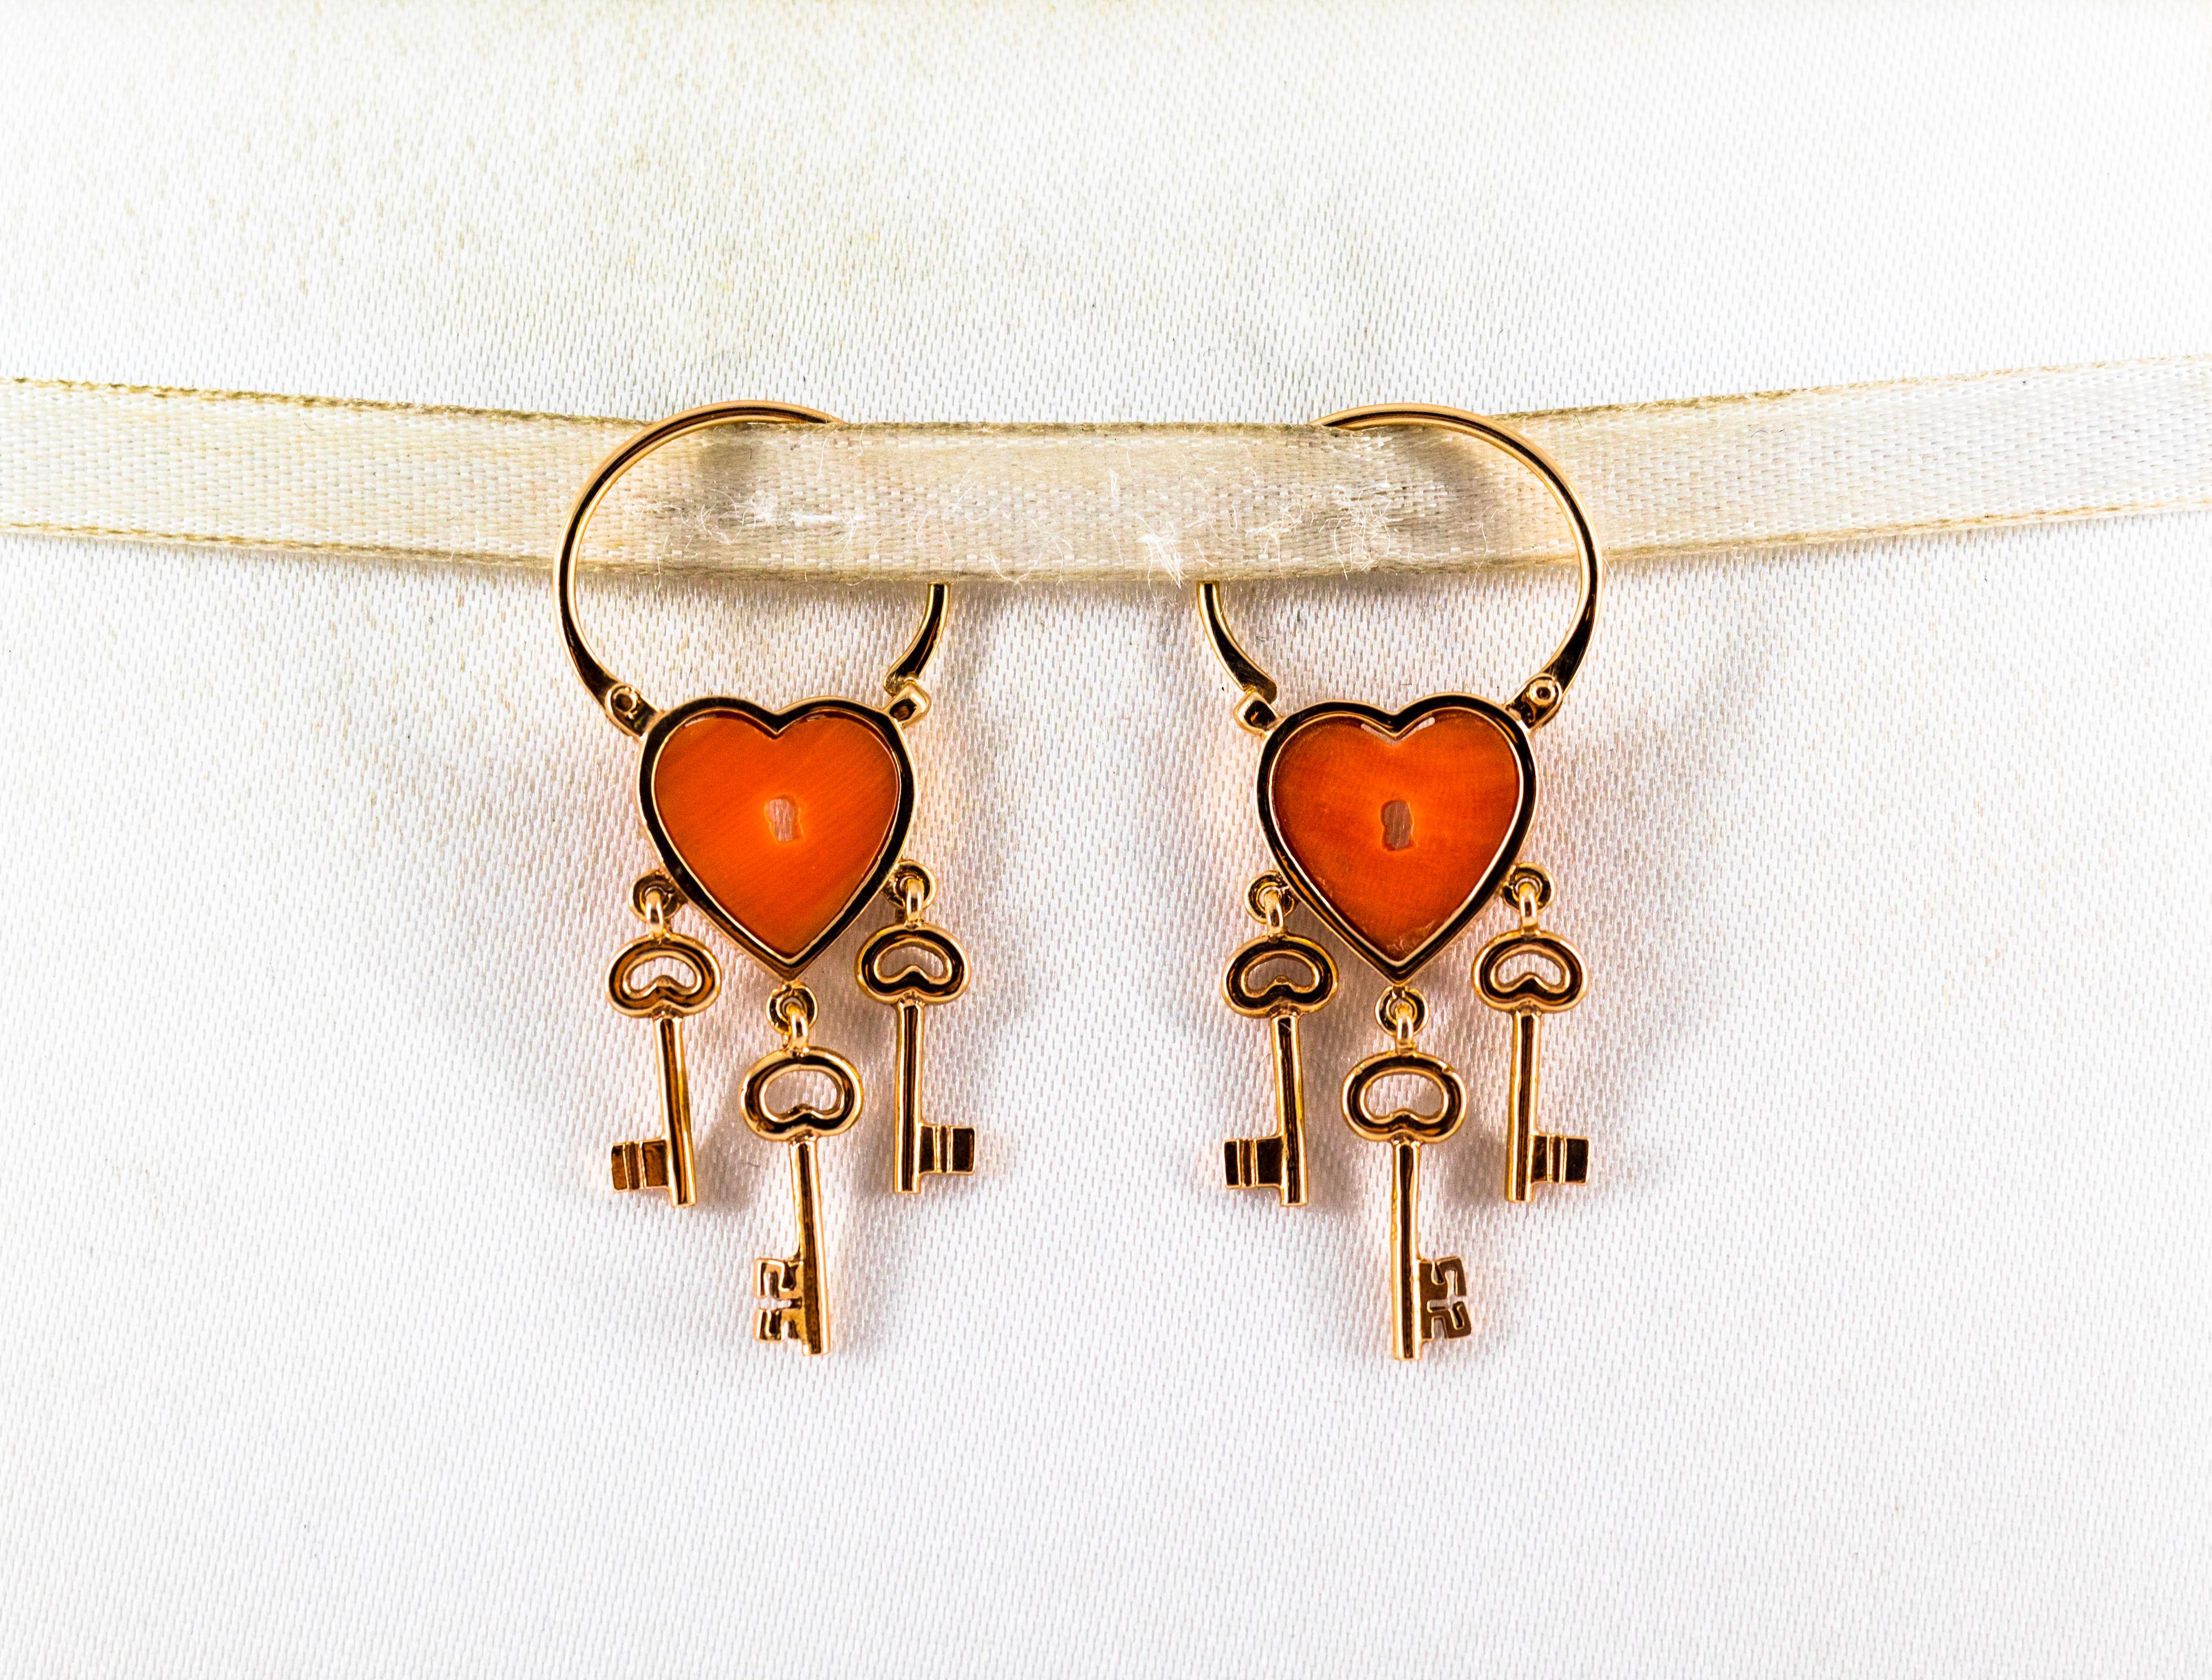 These Earrings are made of 14K Rose Gold.
These Earrings have Mediterranean (Sardinia, Italy) Red/Orange Coral.
All our Earrings have pins for pierced ears but we can change the closure and make any of our Earrings suitable even for non-pierced